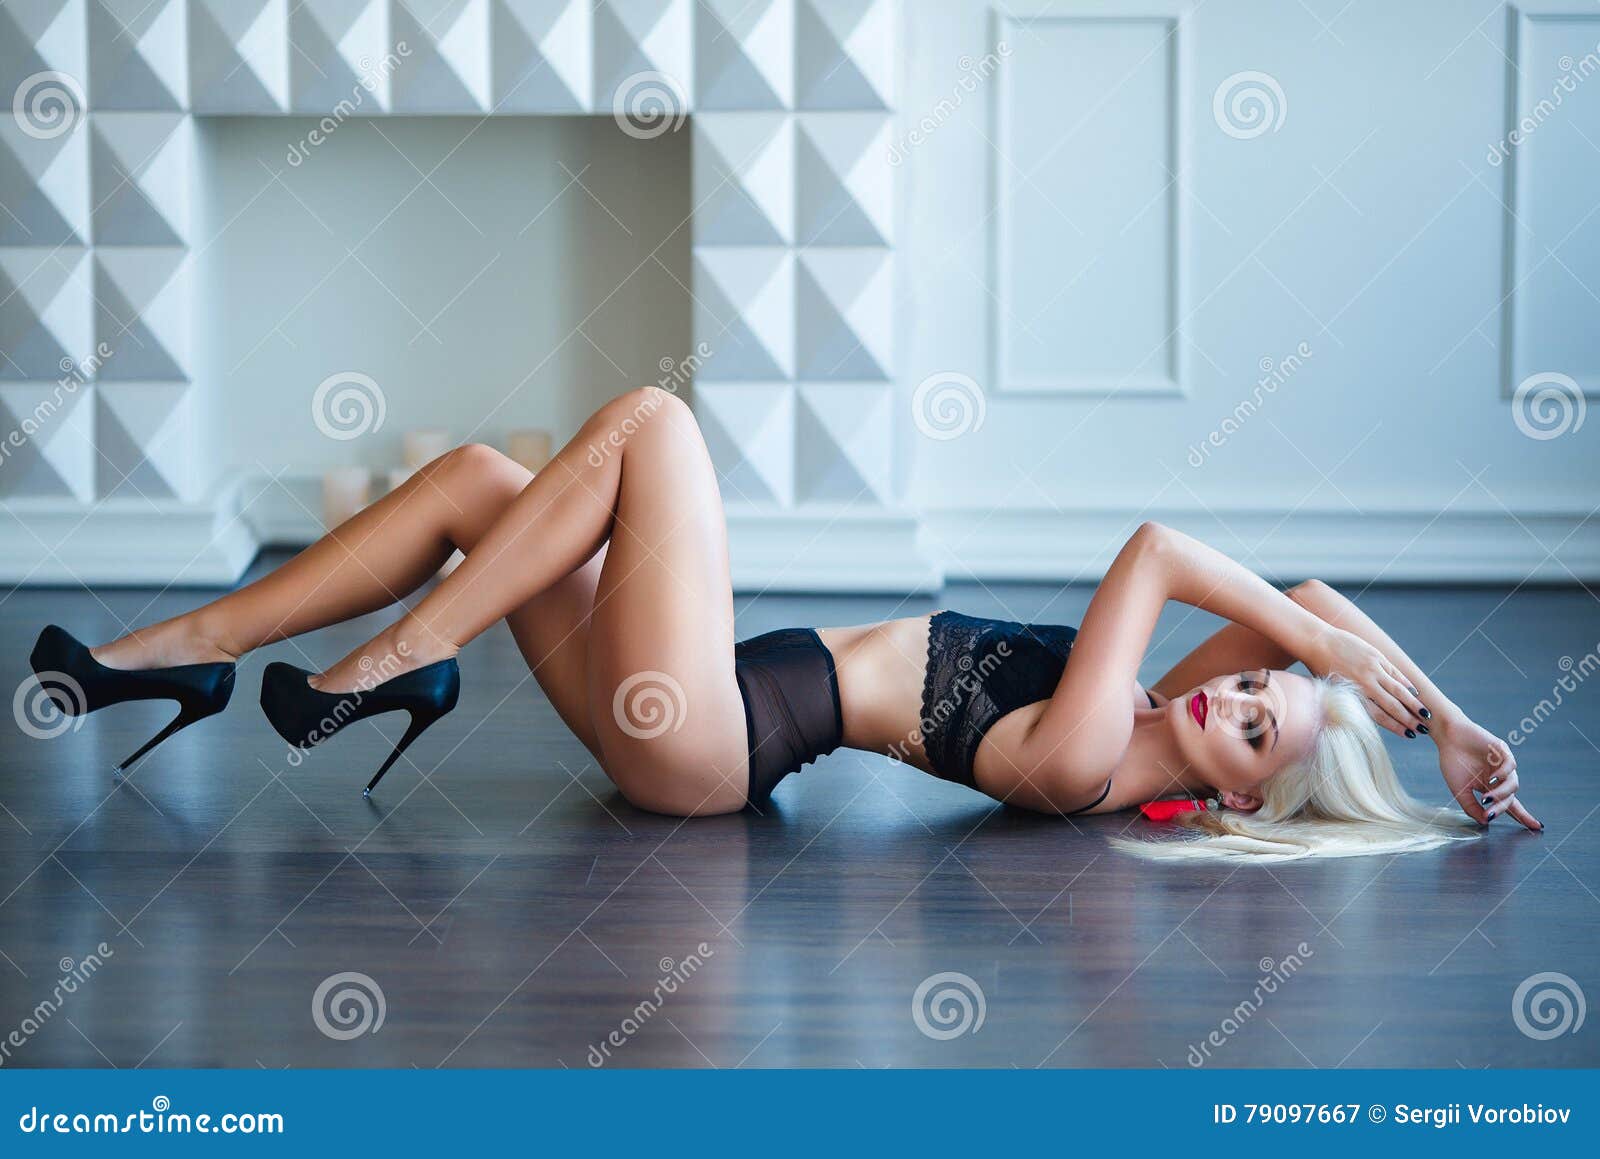 Happy pretty blonde woman model in red bodysuit stands looking at her  perfect legs hips buttocks over white background Stock Photo by ©dml5050  446843832